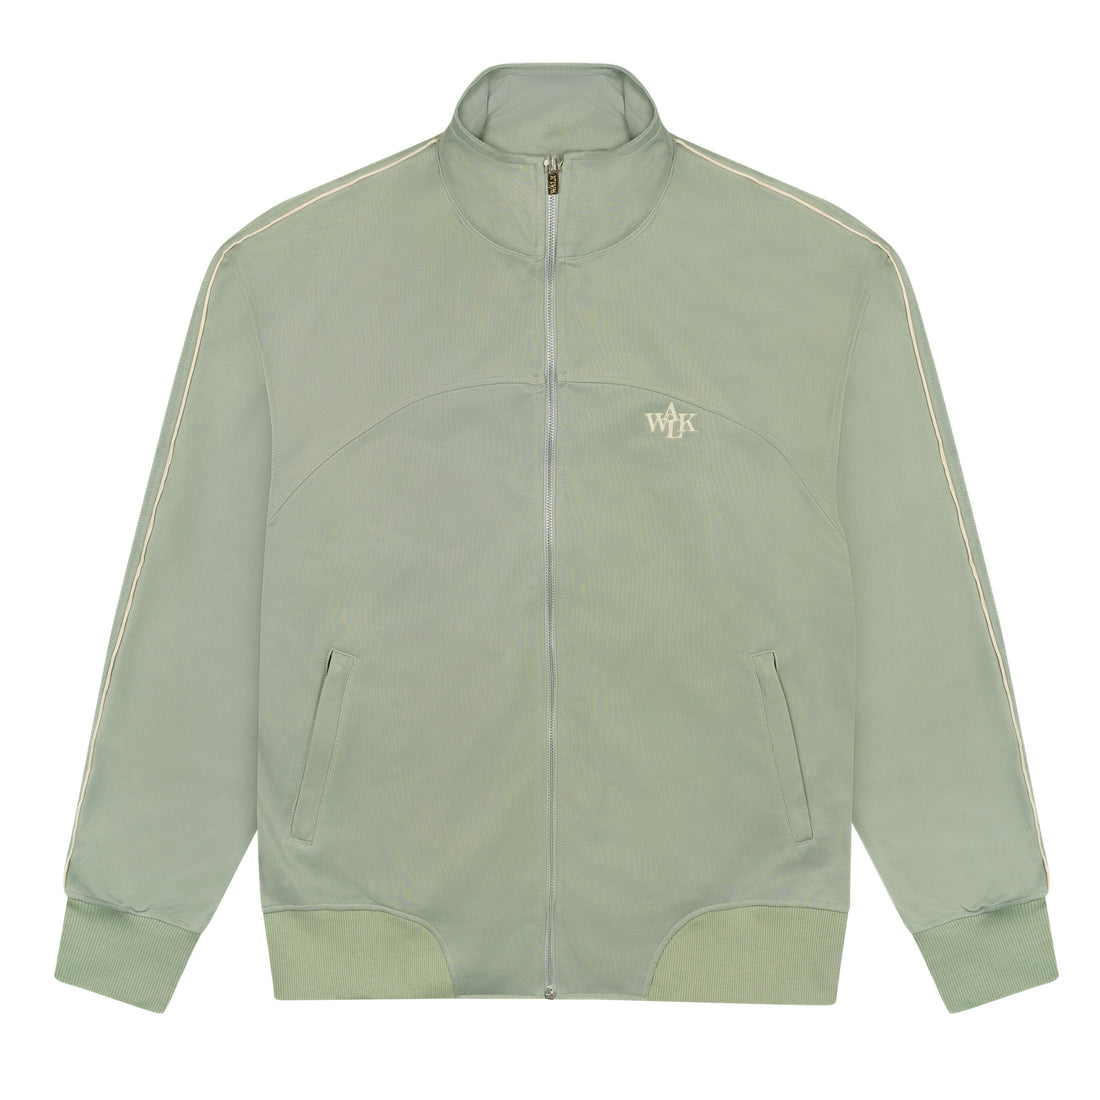 THE PALE GREEN JOGGING JACKET